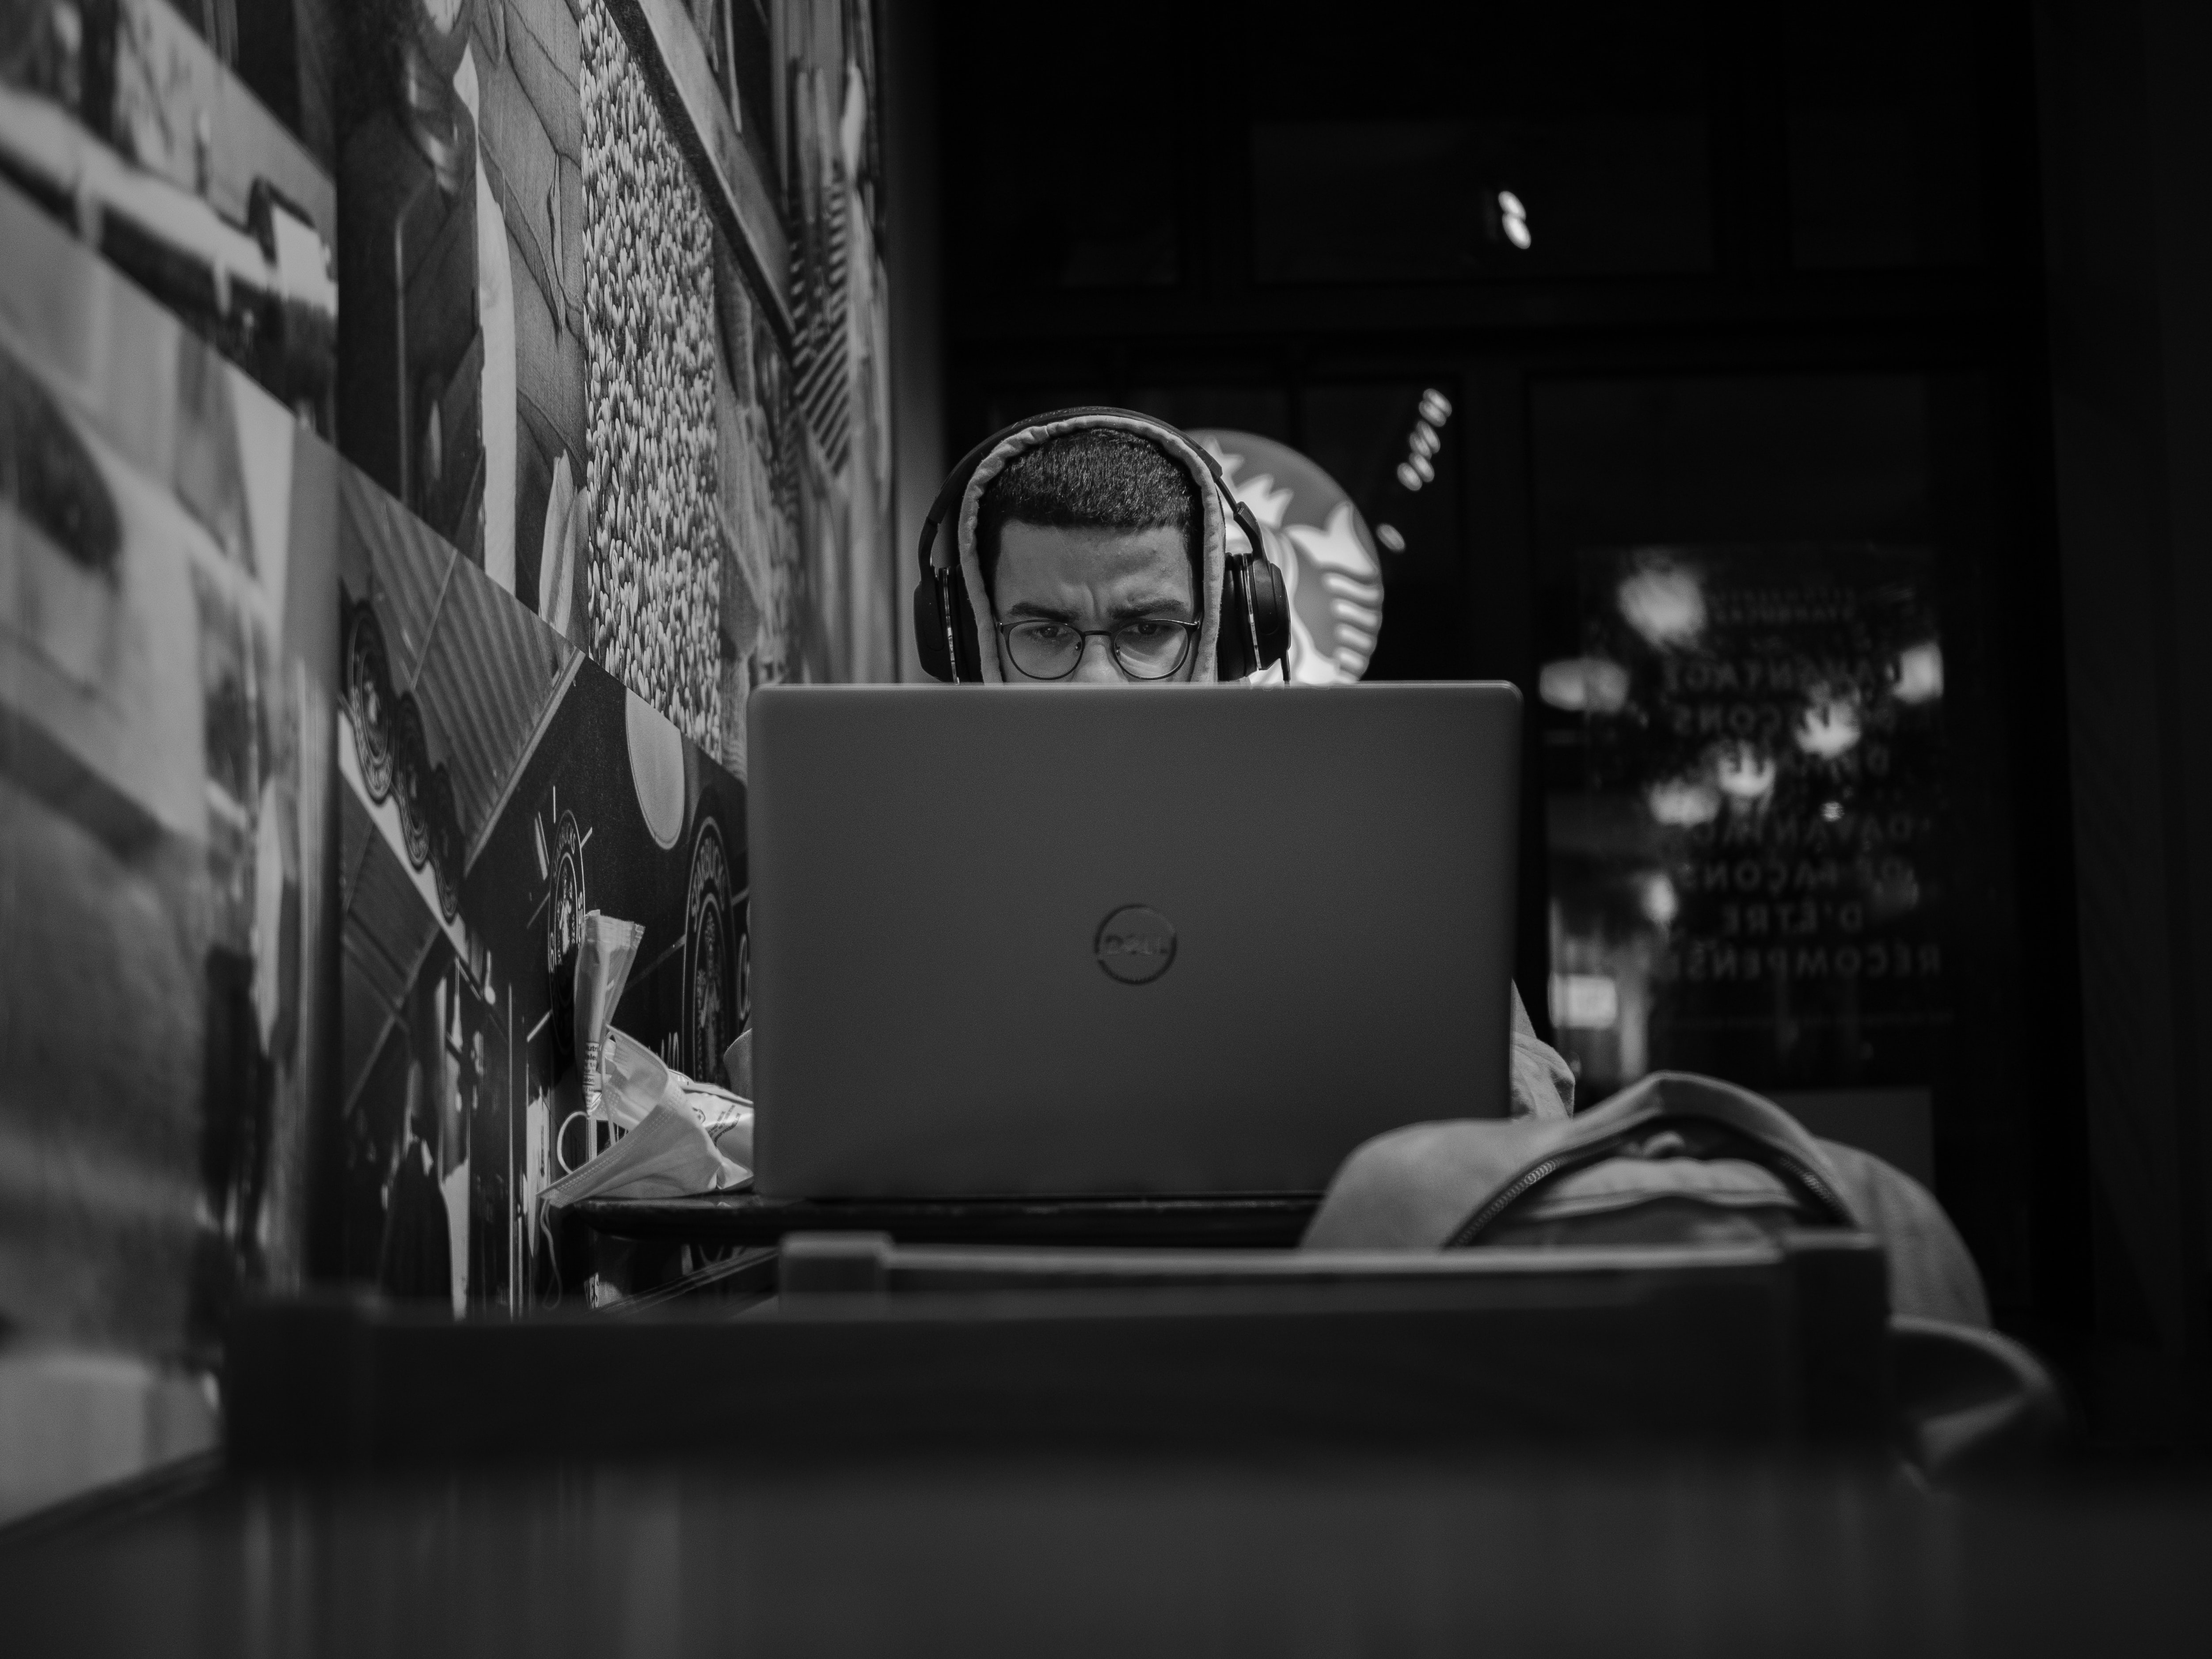 black and white image of a man in a coffee shop working on his laptop. He has headphones on and the computer is covering half of his face,